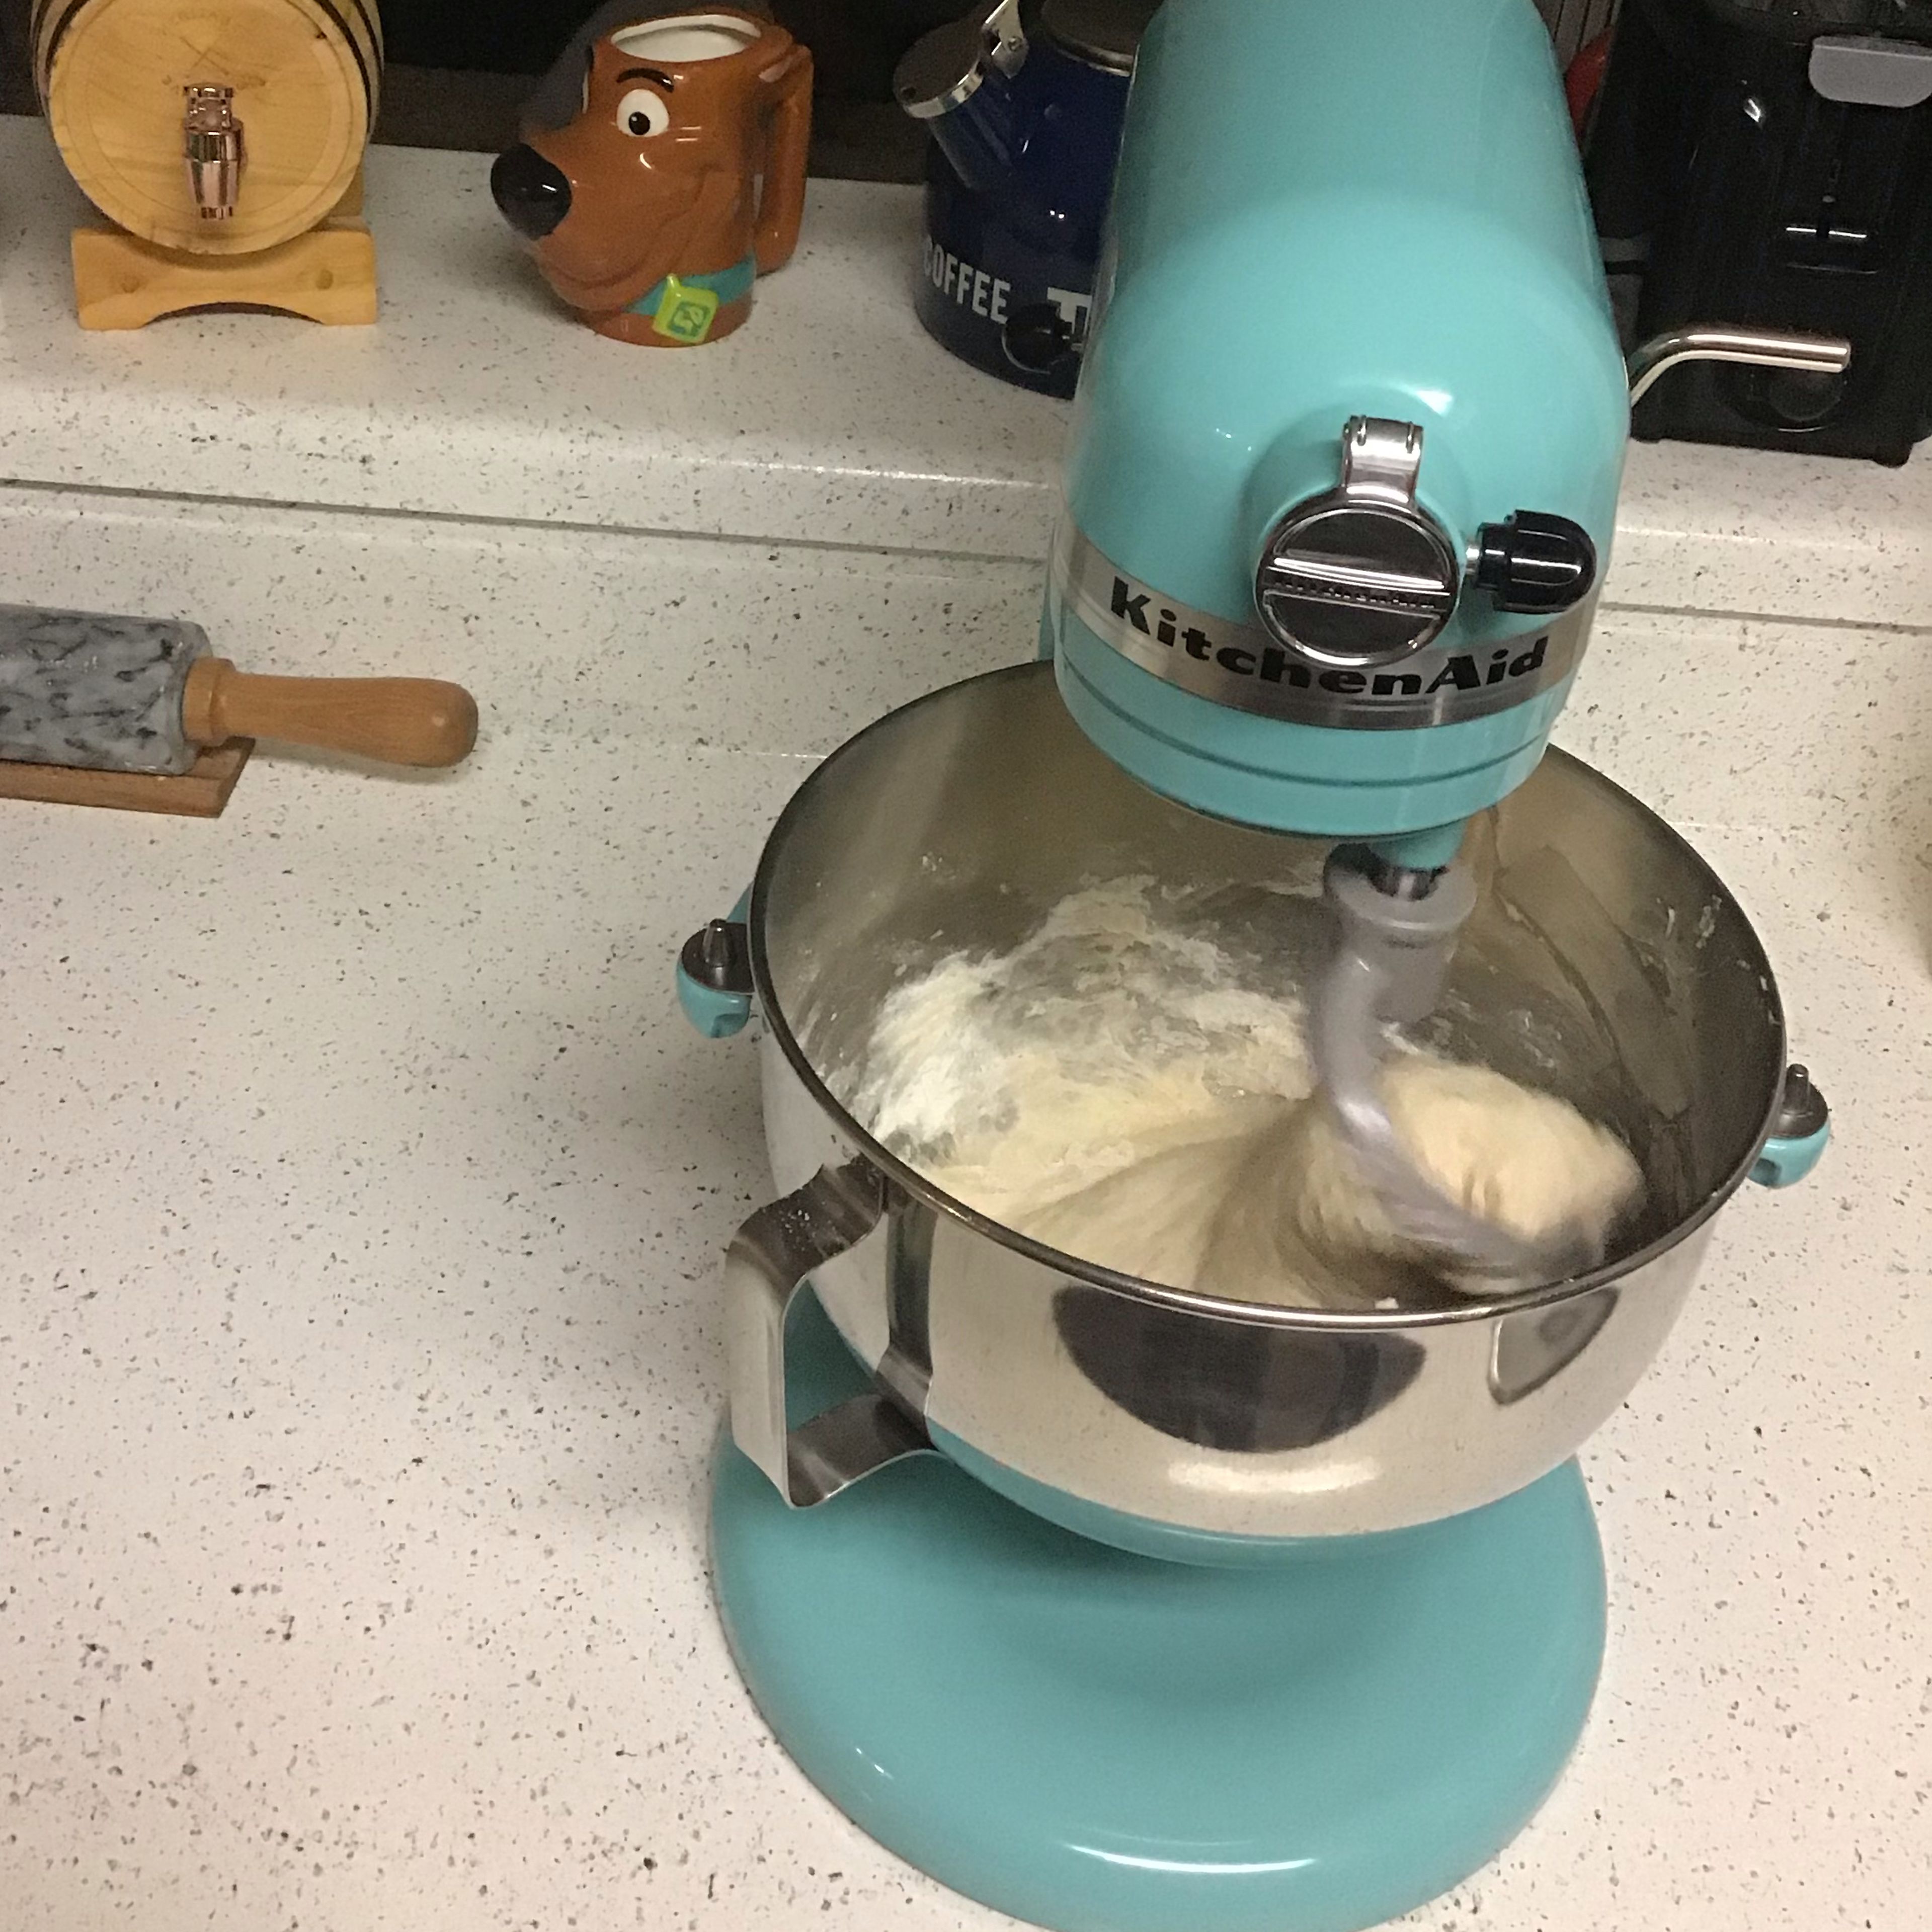 Transfer the dough to a clean counter dusted with a little of flour, and knead (with more flour if needed) until it doesn’t sticks to your hands and is very smooth. This process should take about 15 to 20 minutes. (It can be made in one stand mixer)